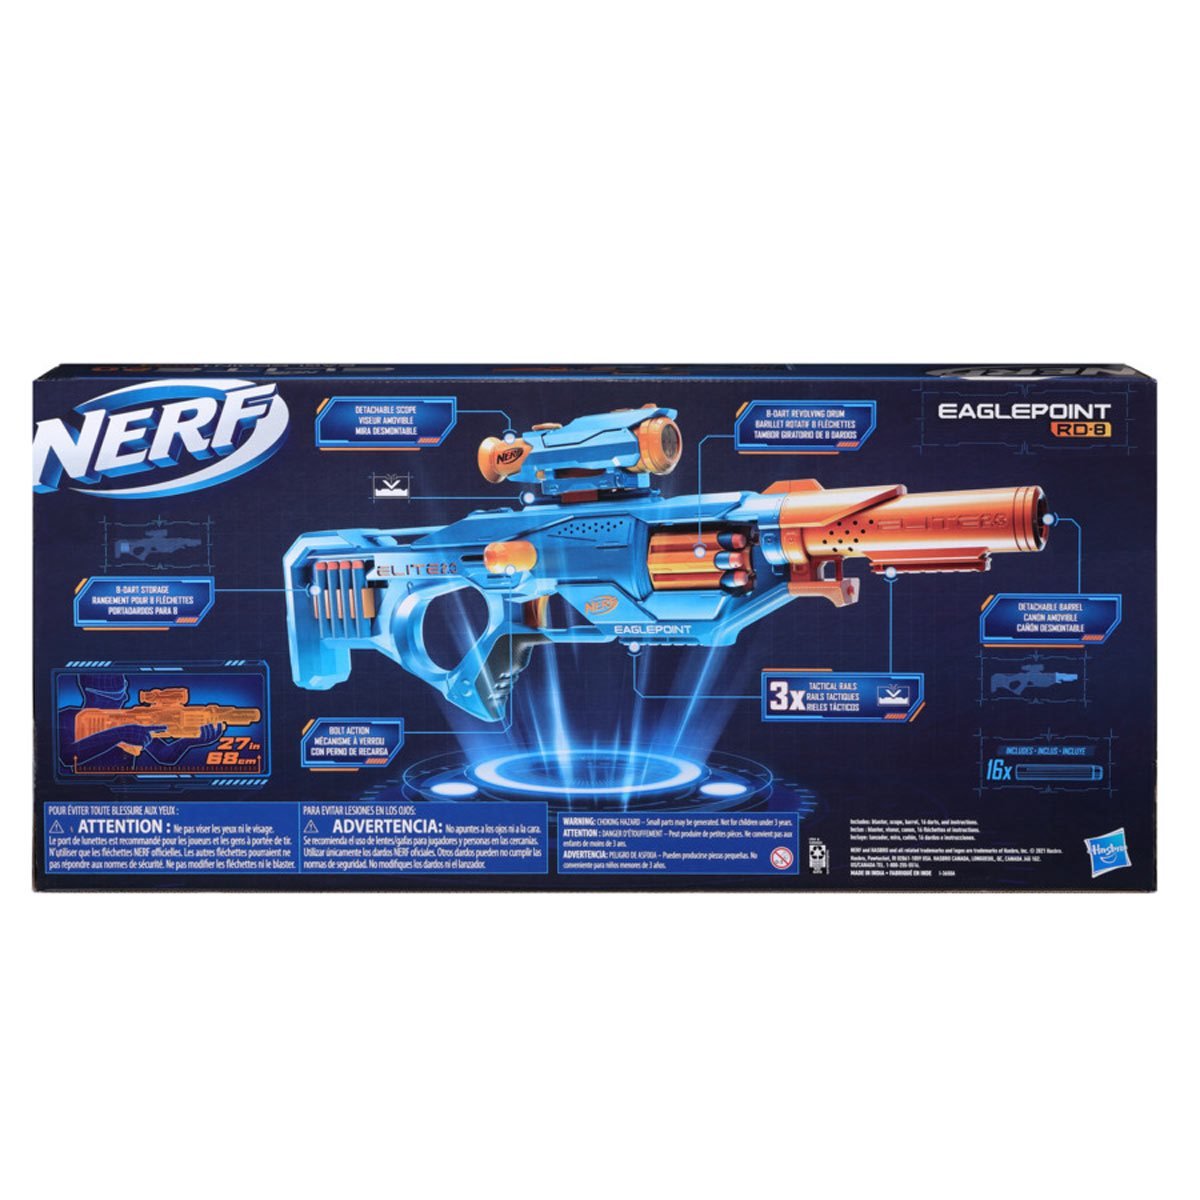 Honest Review: NERF Elite 2.0 Eagle Point (IS HASBRO LEARNING?!?!) 